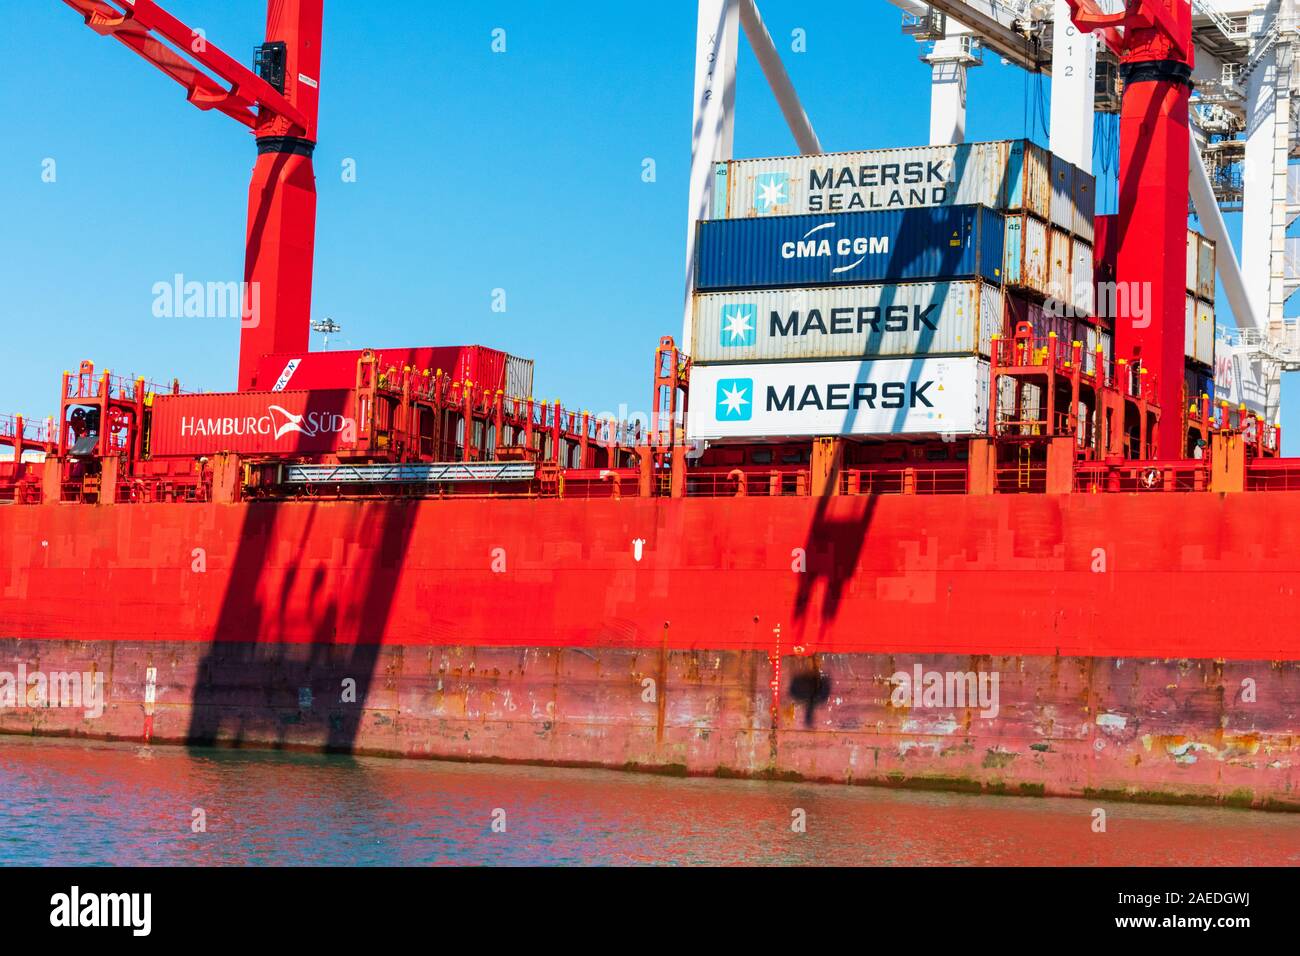 Maersk, CMA CGM, Hamburg Sud shipping containers stacked aboard bright red container ship - Oakland, California, USA - August, 2019 Stock Photo